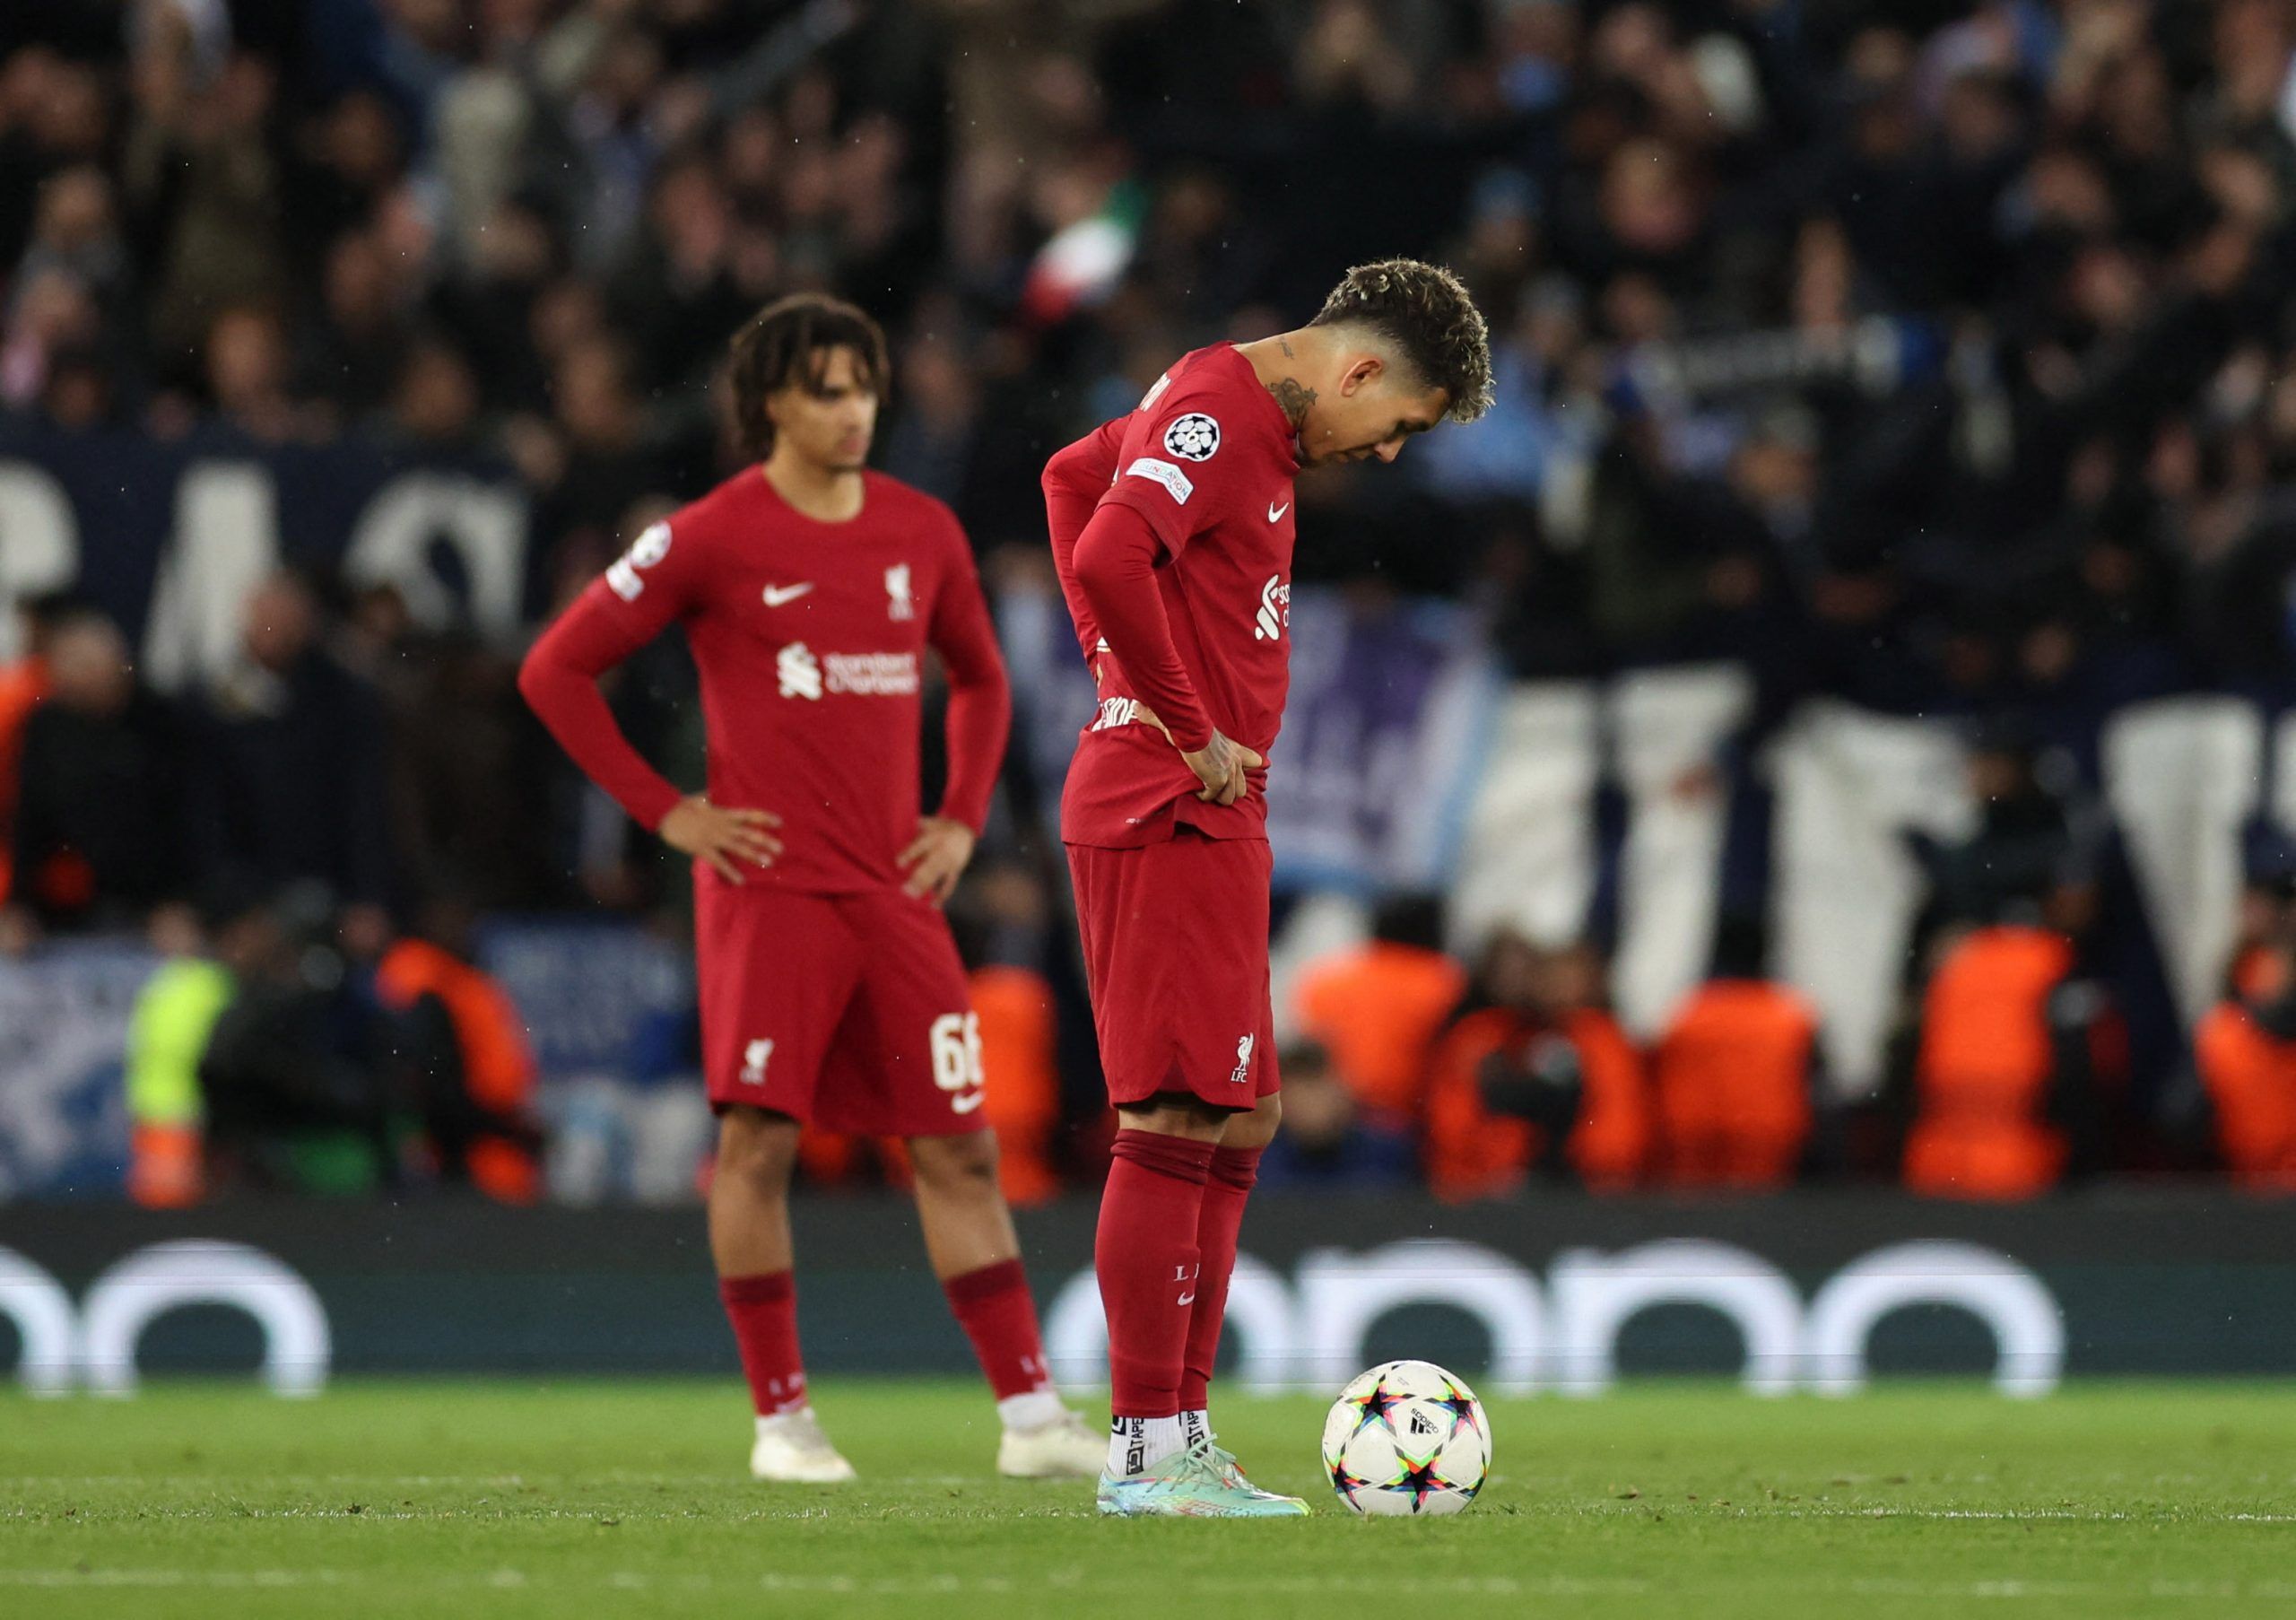 Soccer Football - Champions League - Group A - Liverpool v Napoli - Anfield, Liverpool, Britain - November 1, 2022 Liverpool's Roberto Firmino looks dejected after Napoli's Leo Ostigard scores their first goal REUTERS/Carl Recine